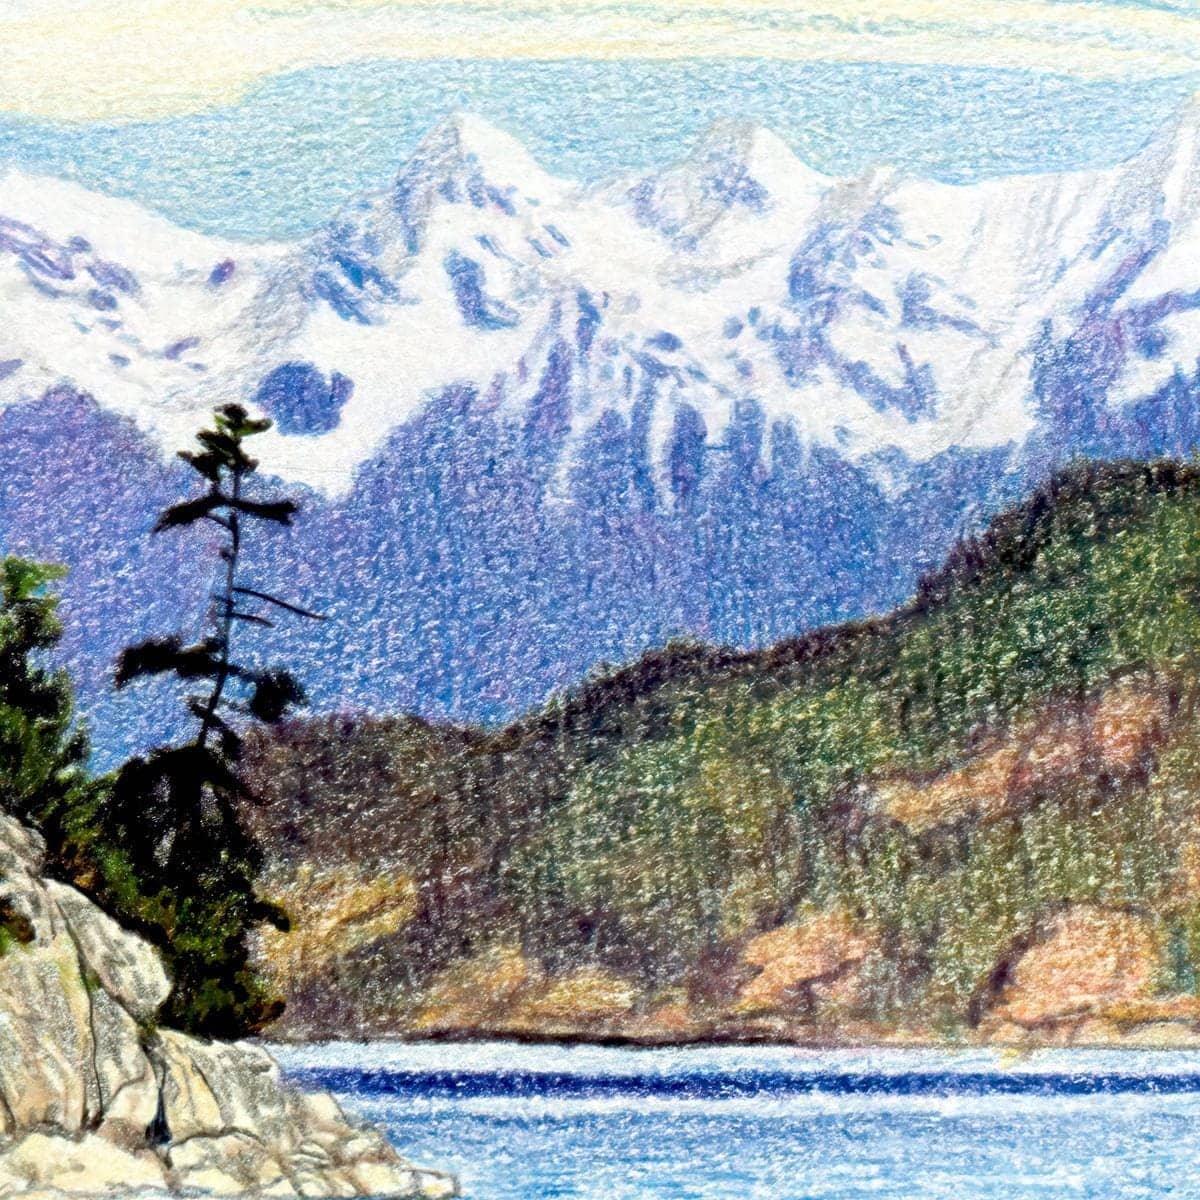 Snow Capped Mountains in British Columbia - Art Print | Artwork by Glen Loates